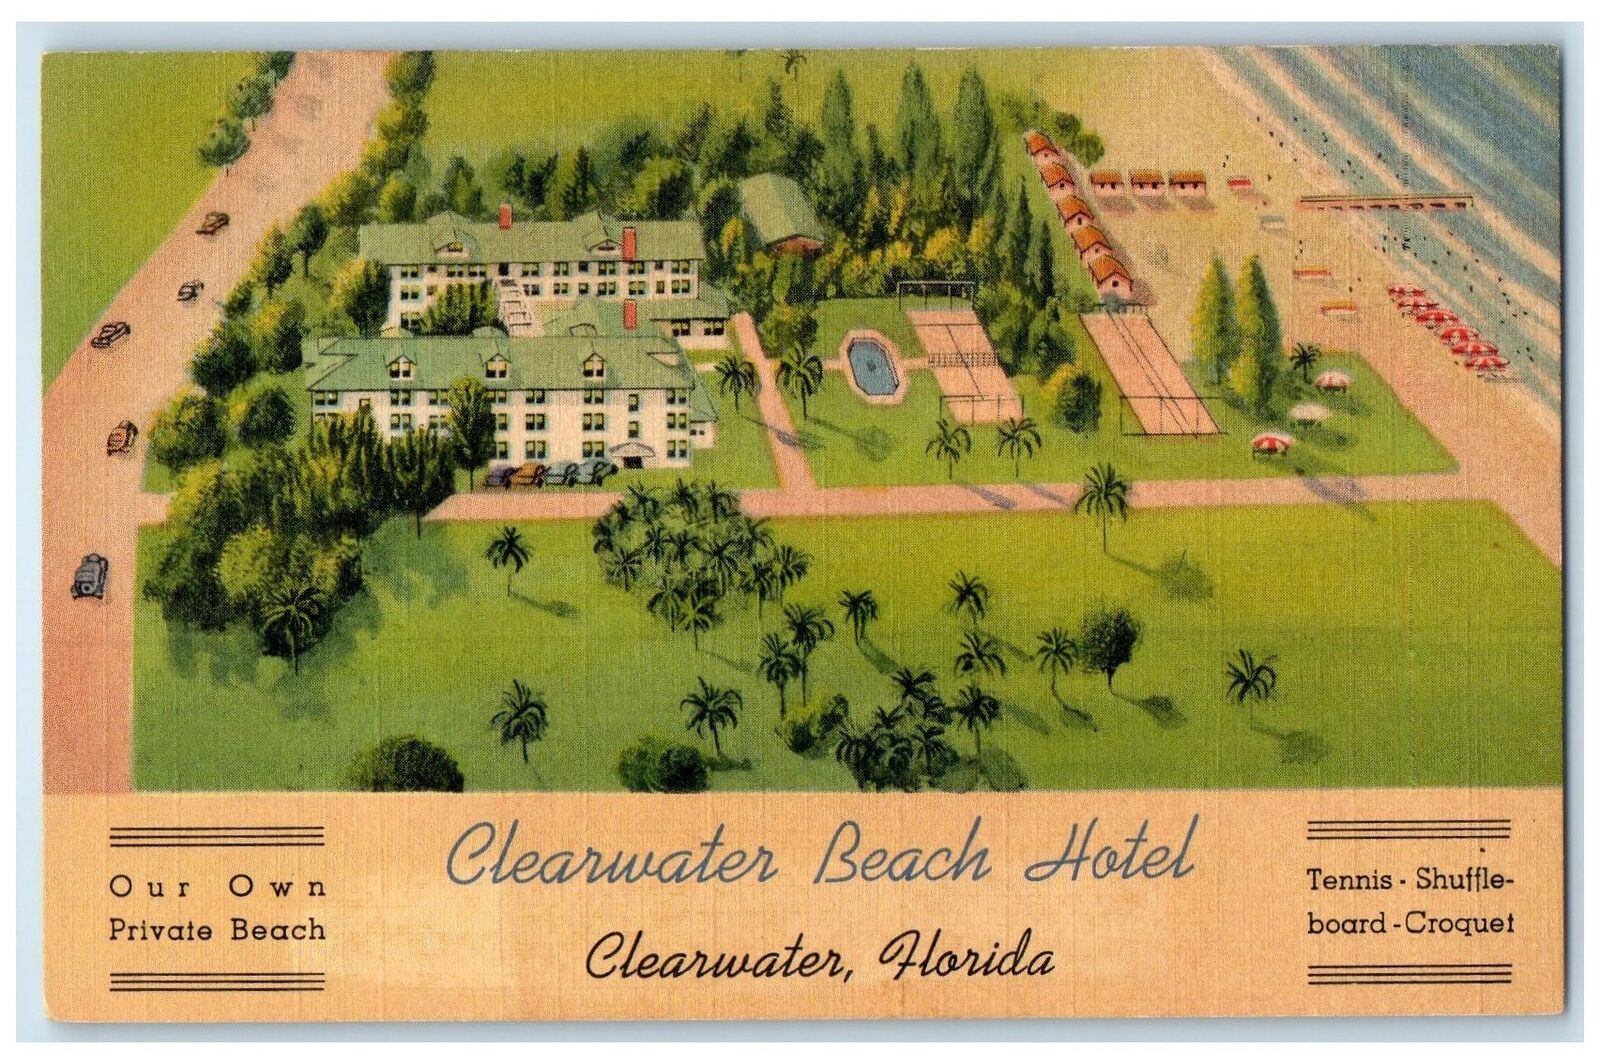 c1940 Aerial View Clearwater Beach Hotel Restaurant Clearwater Florida Postcard